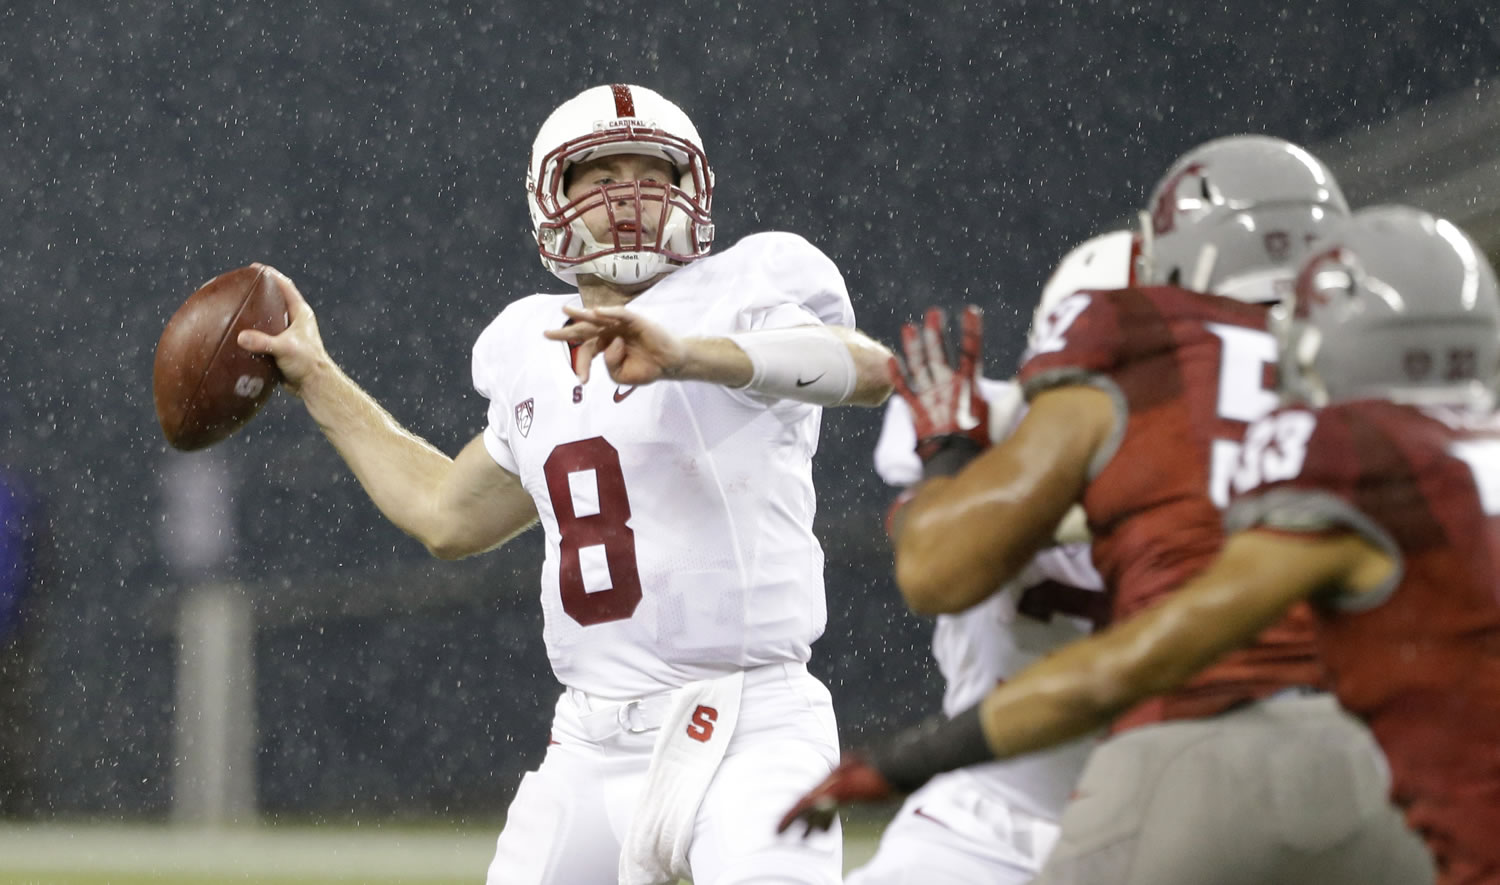 Stanford quarterback Kevin Hogan drops back to pass against Washington State in the second half Saturday.